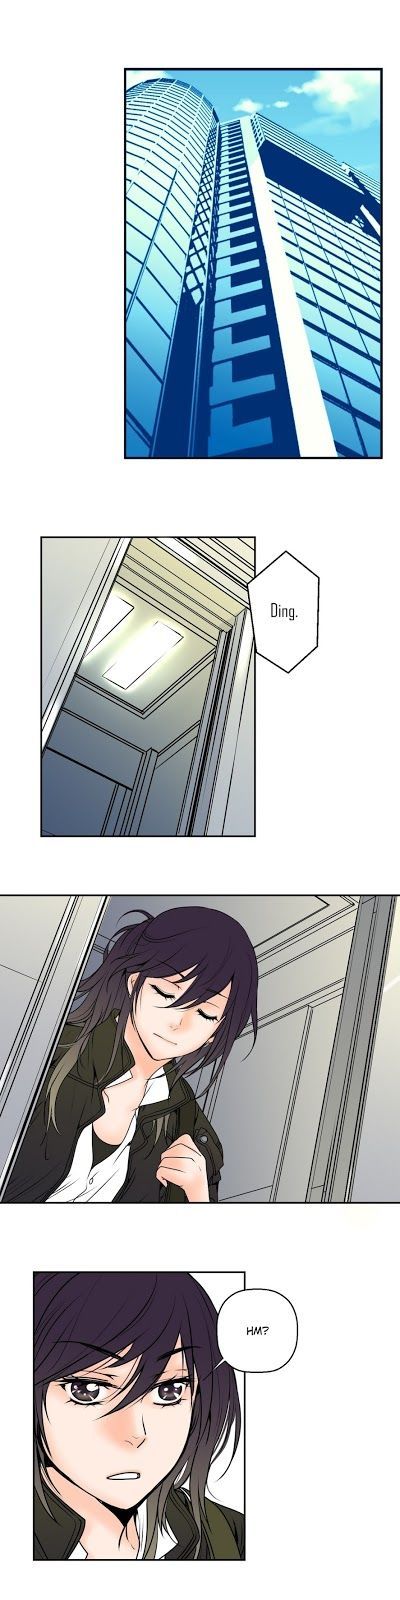 Pulse Chapter 035 page 9